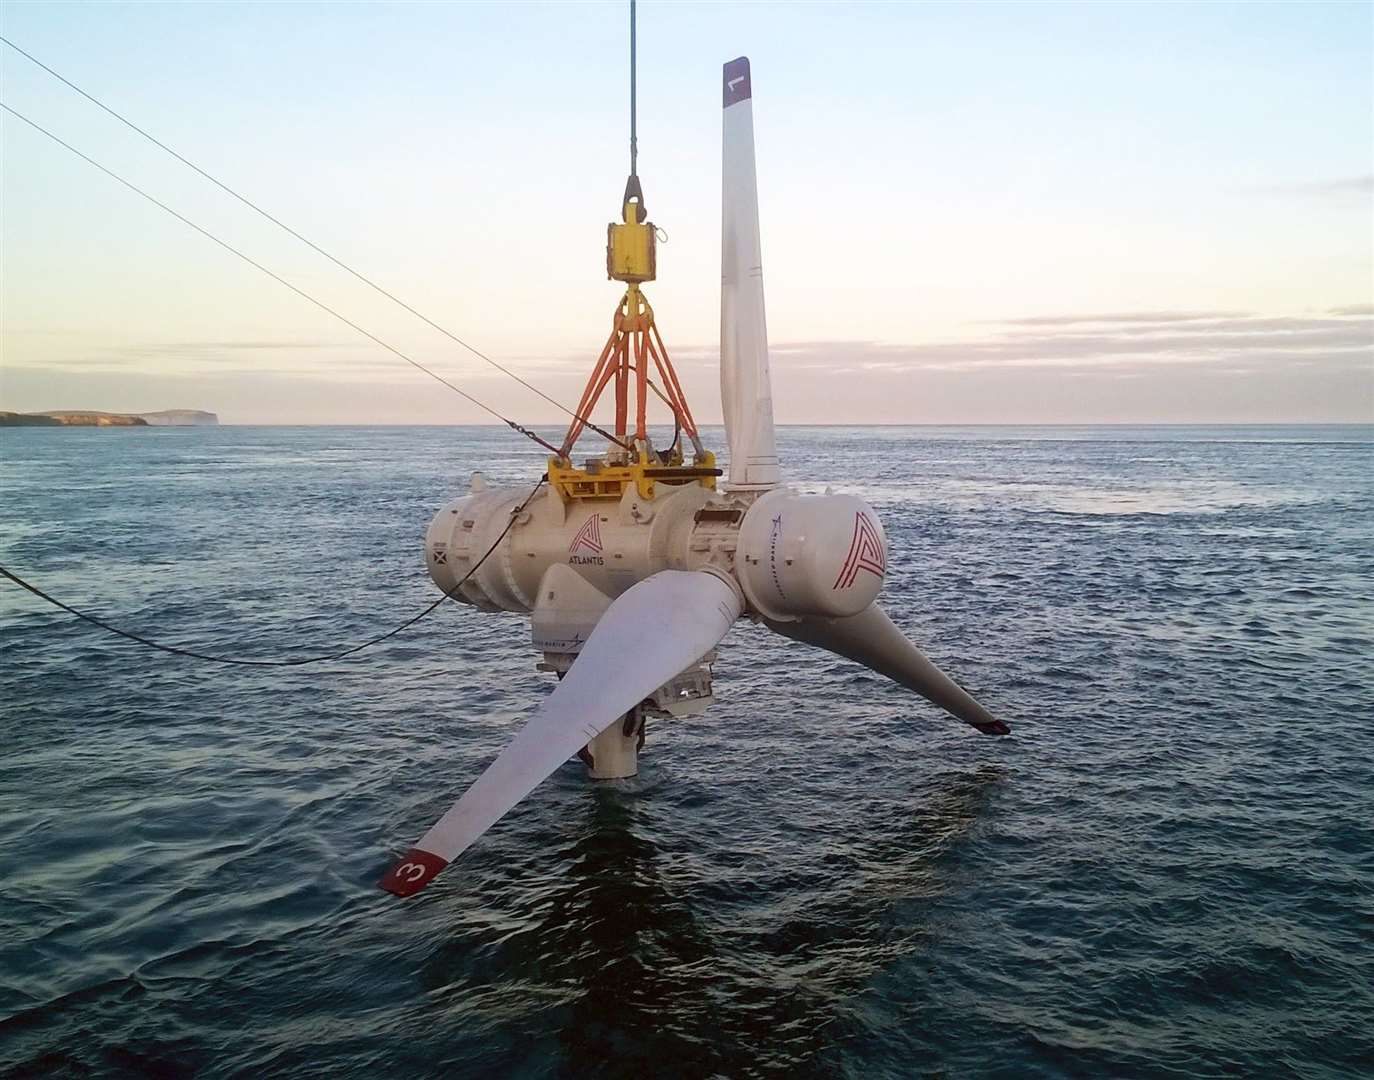 MeyGen has won contracts to develop a further 22MW of tidal power at its Pentland Firth site.